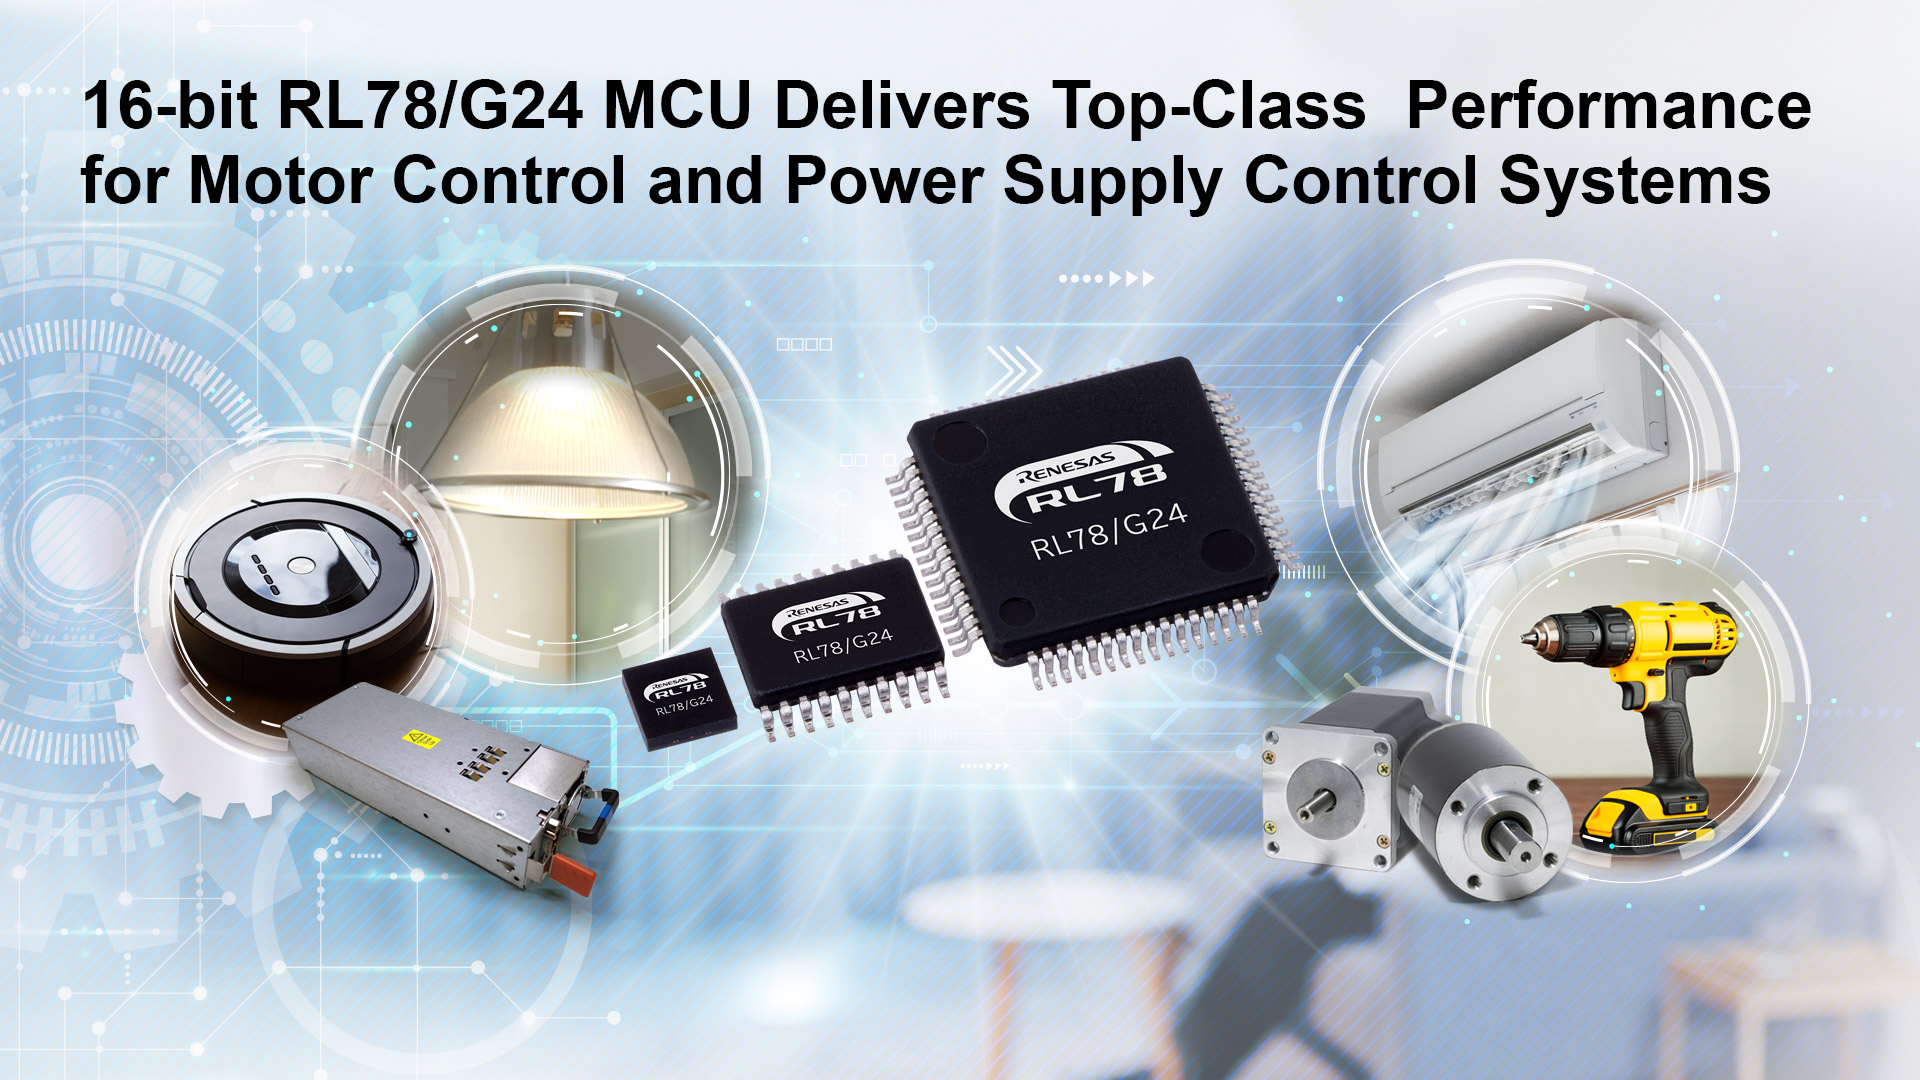 Renesas' New 16-bit RL78/G24 MCU Delivers Top-Class Performance for Motor Control and Power Supply Control Systems